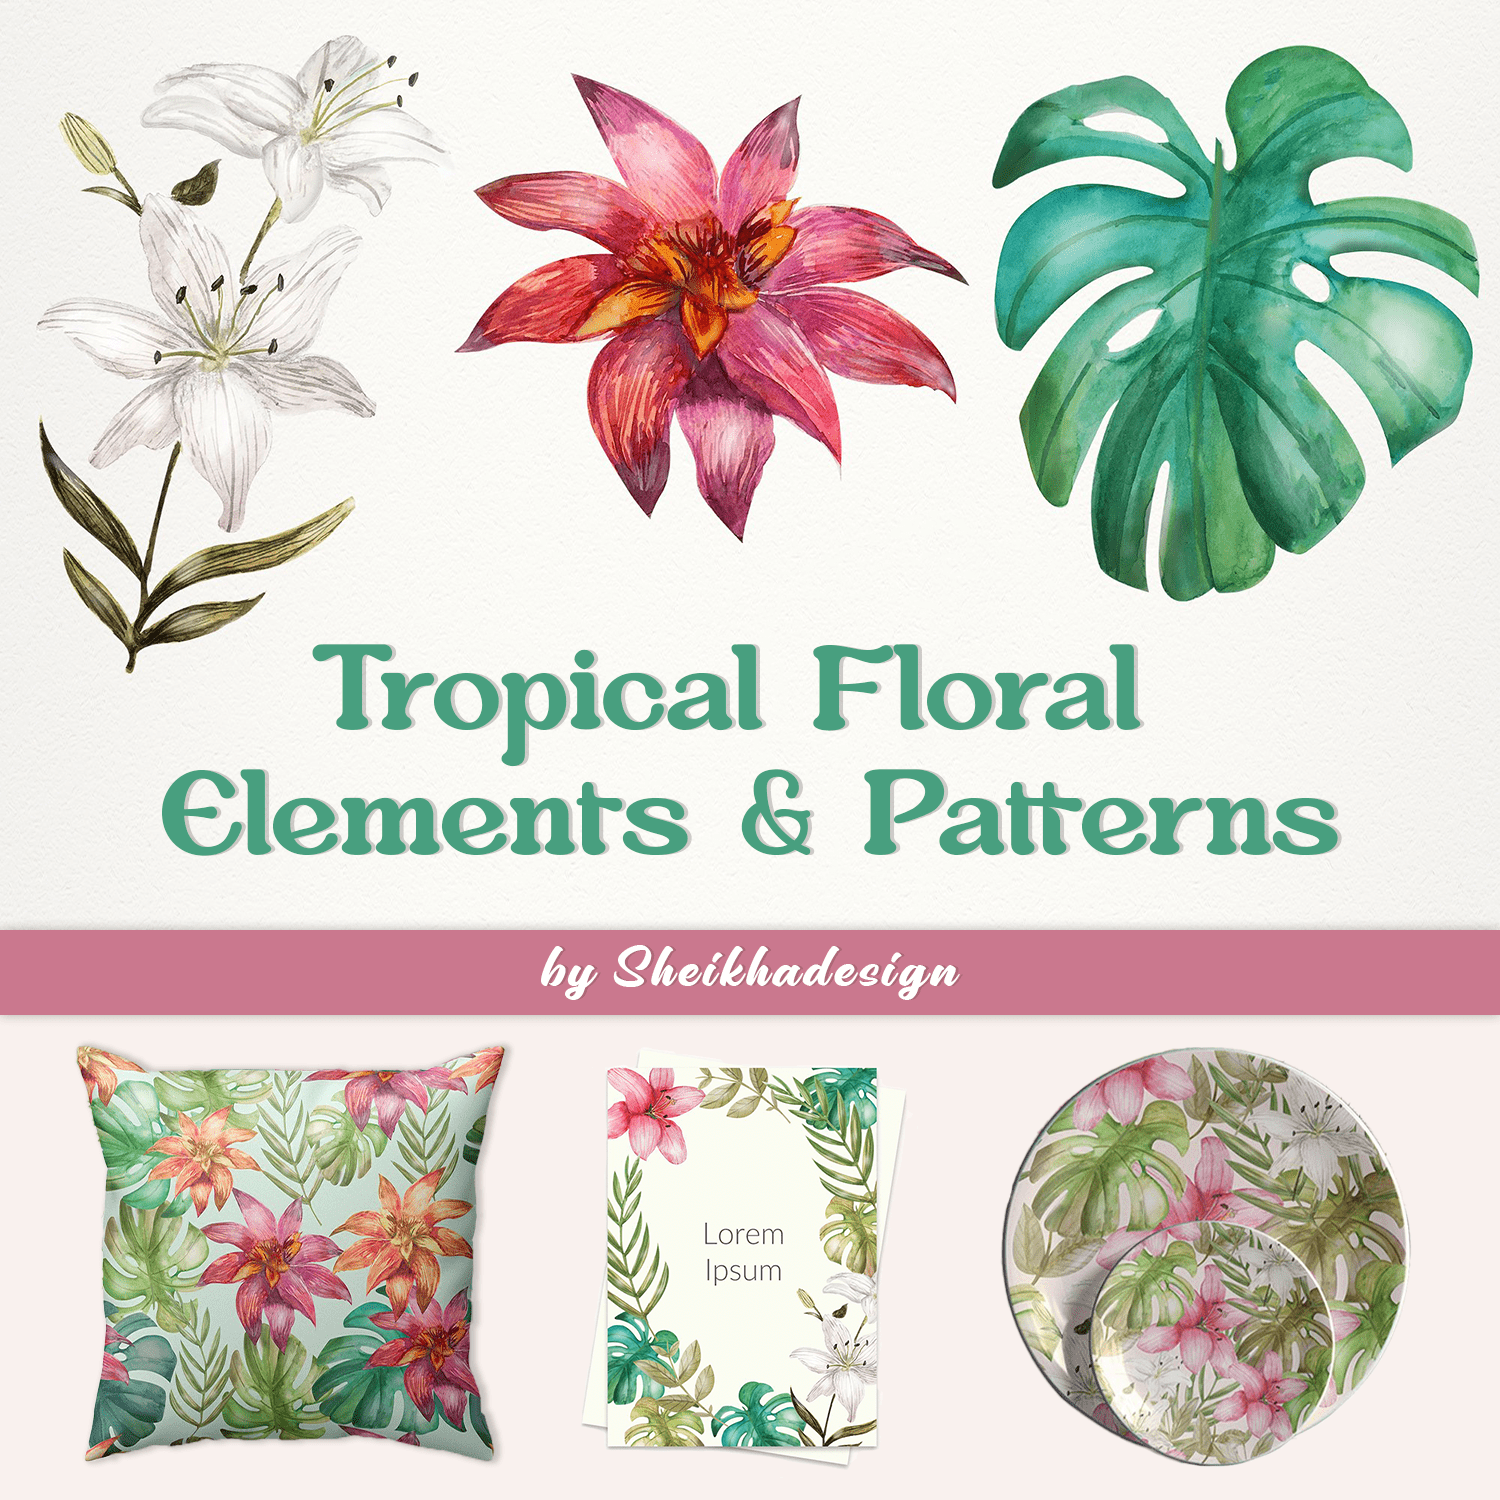 Tropical Floral Elements & Patterns cover.